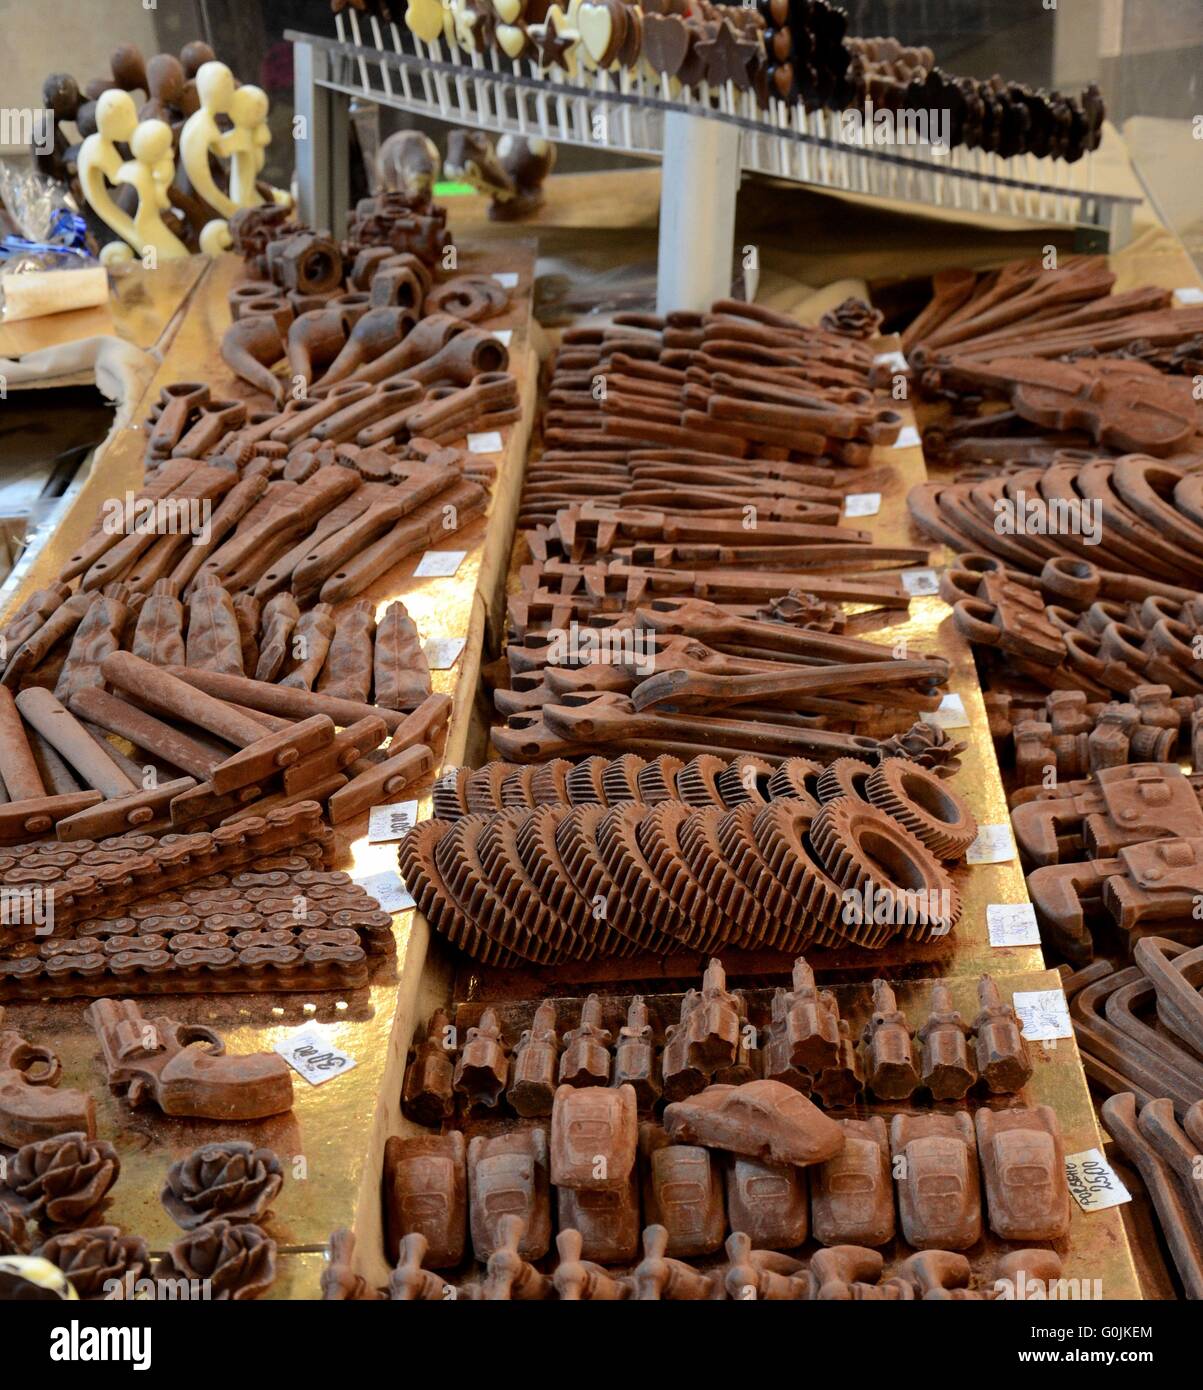 Chocolate sculpture carvings of guns pipes cars chains and couples on display in shelves Stock Photo